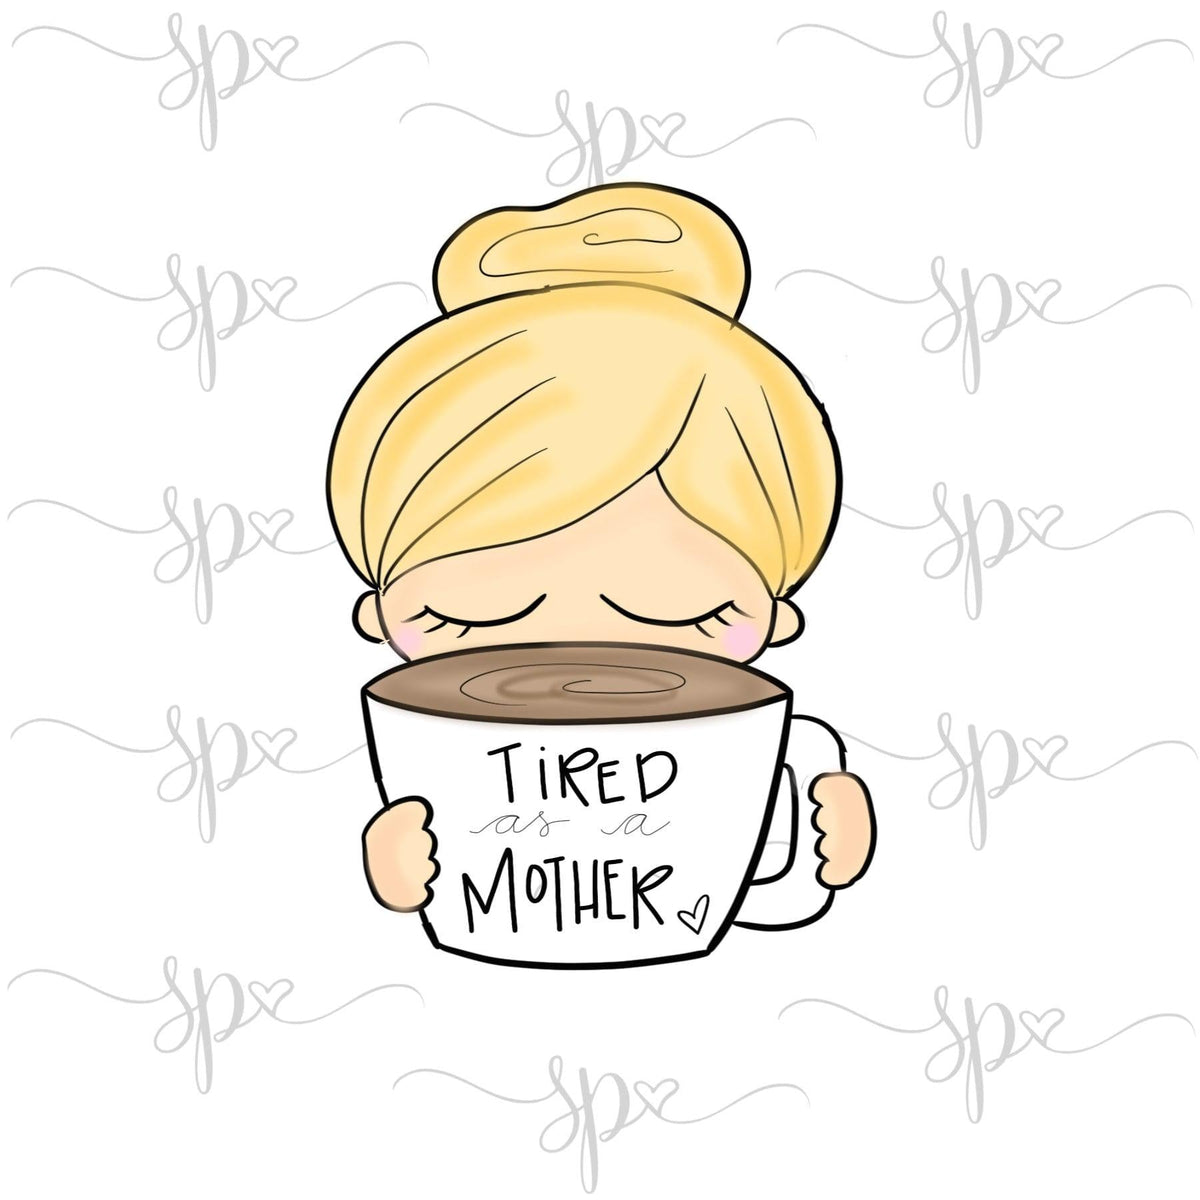 Tired As a Mother Cookie Cutter - Sweetleigh 